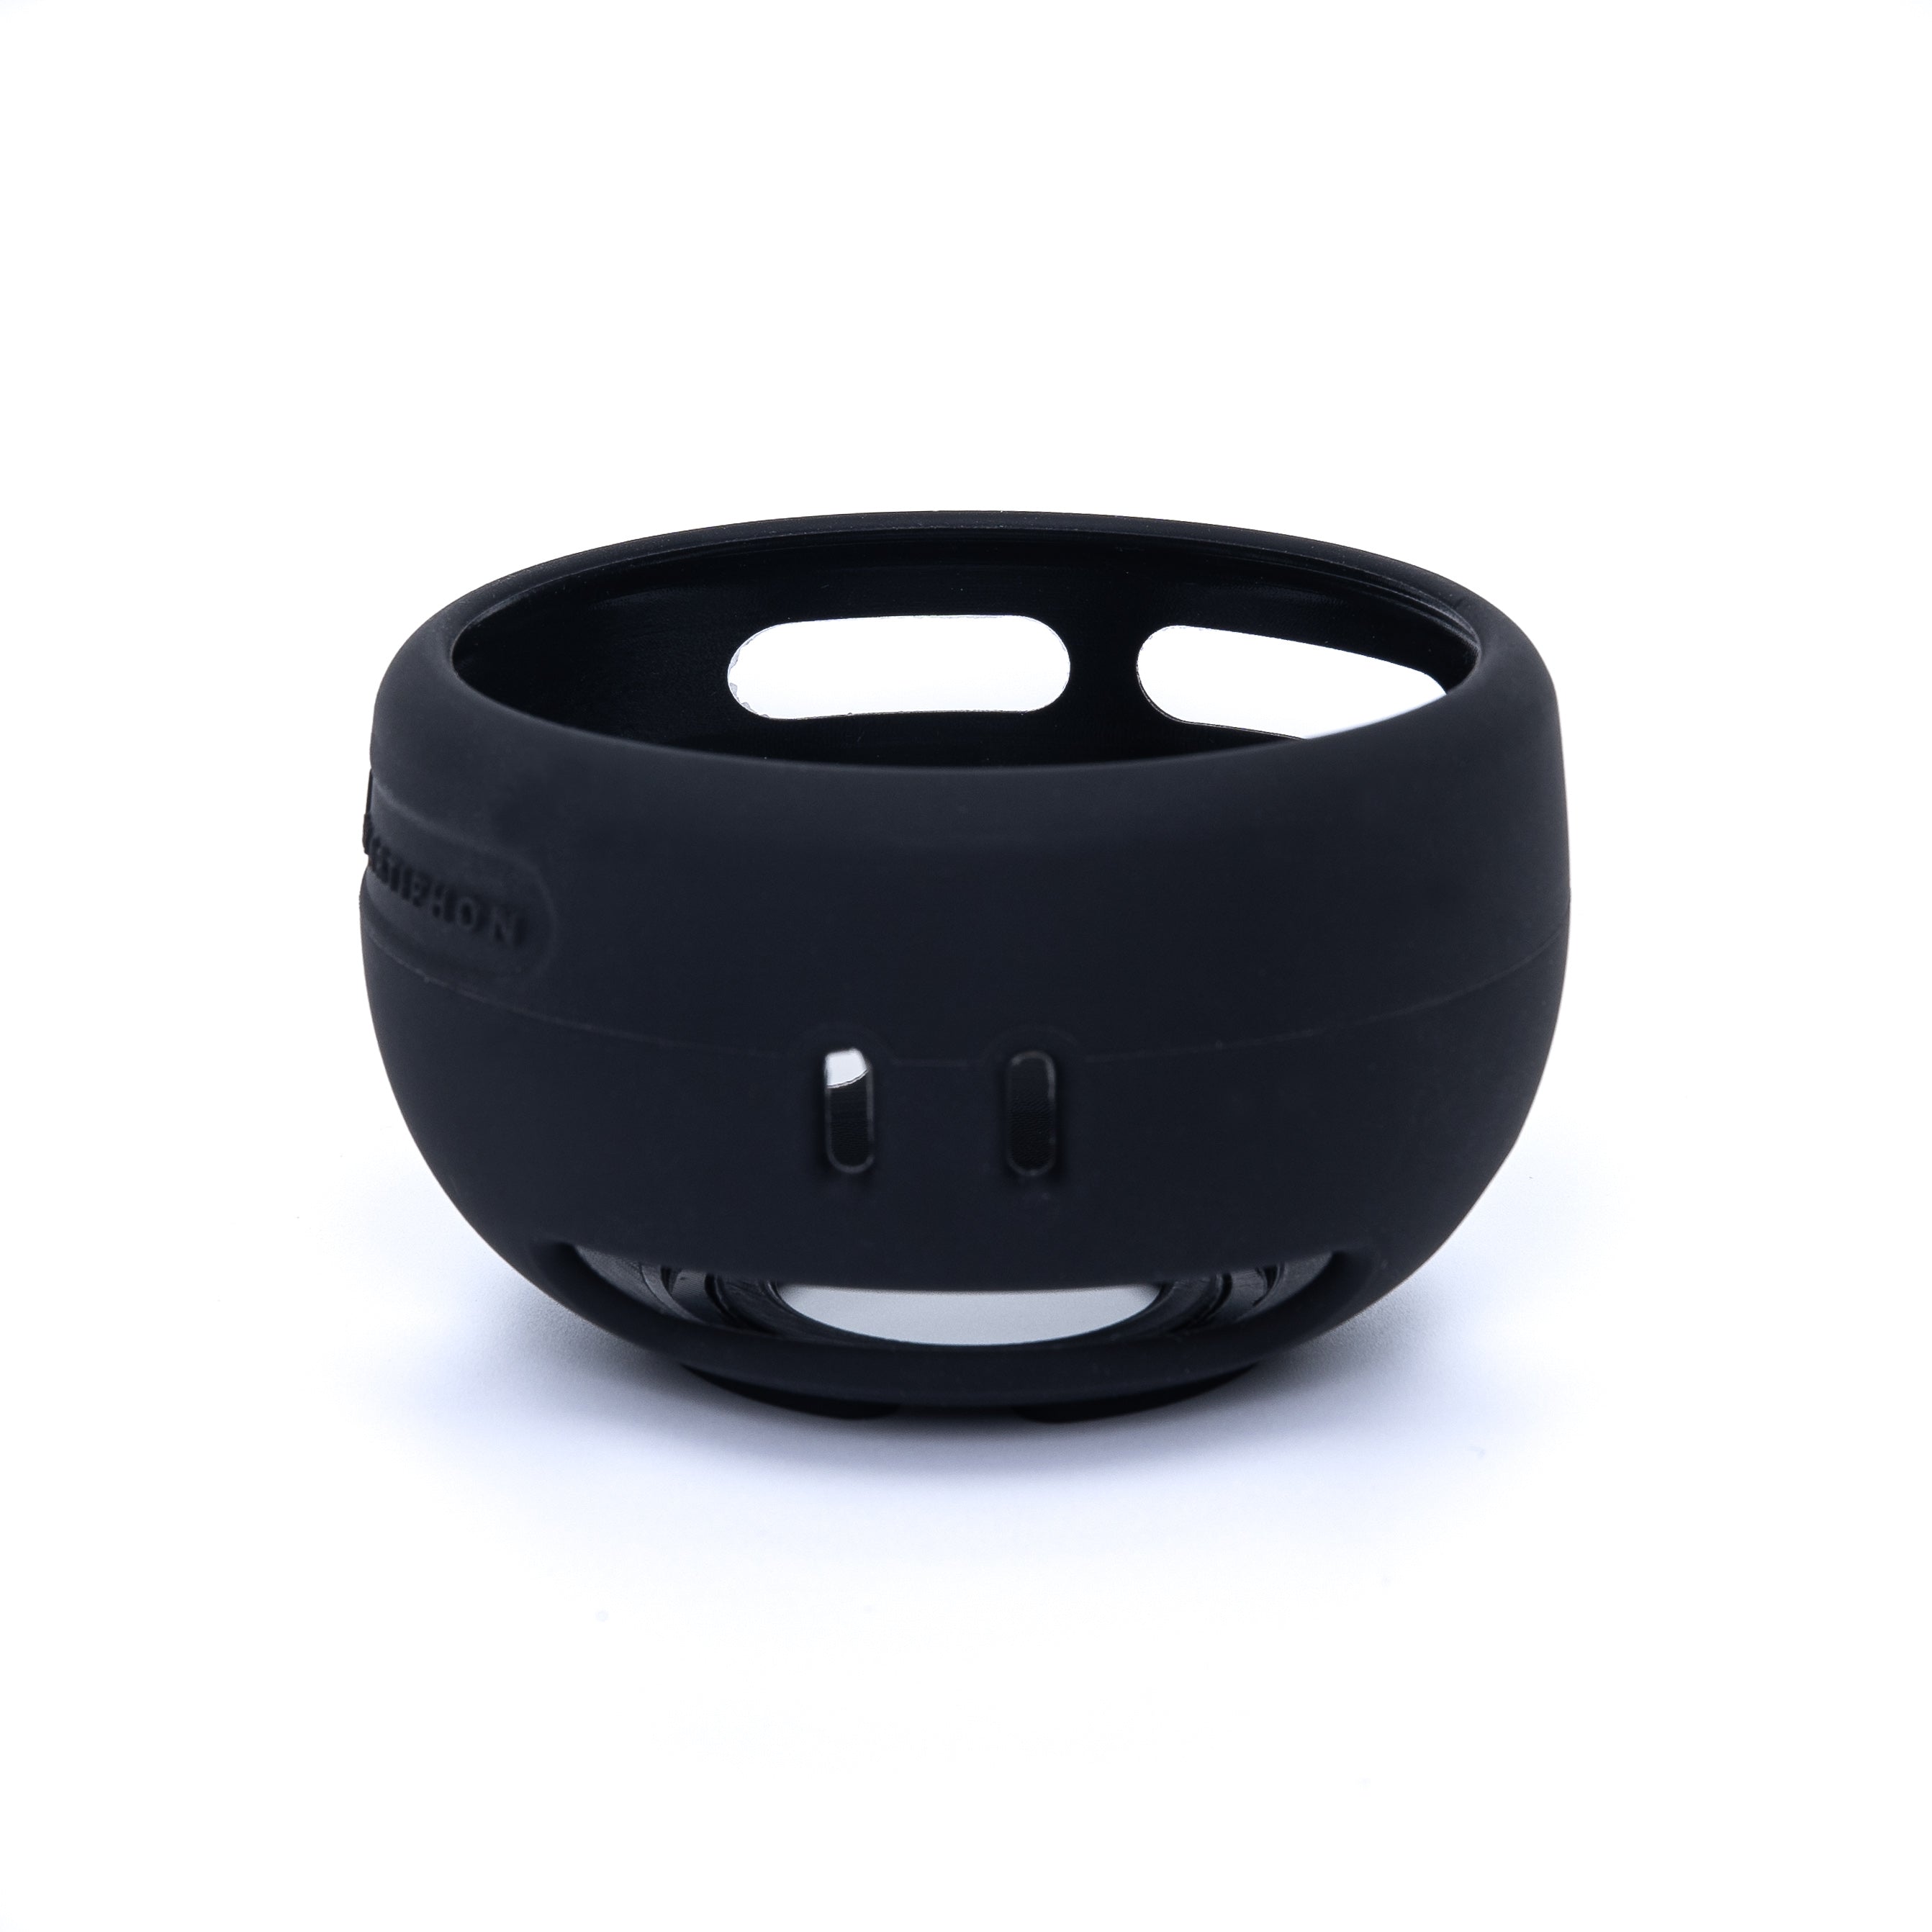 Black silicone sleeve for Orba 1 and Orba 2